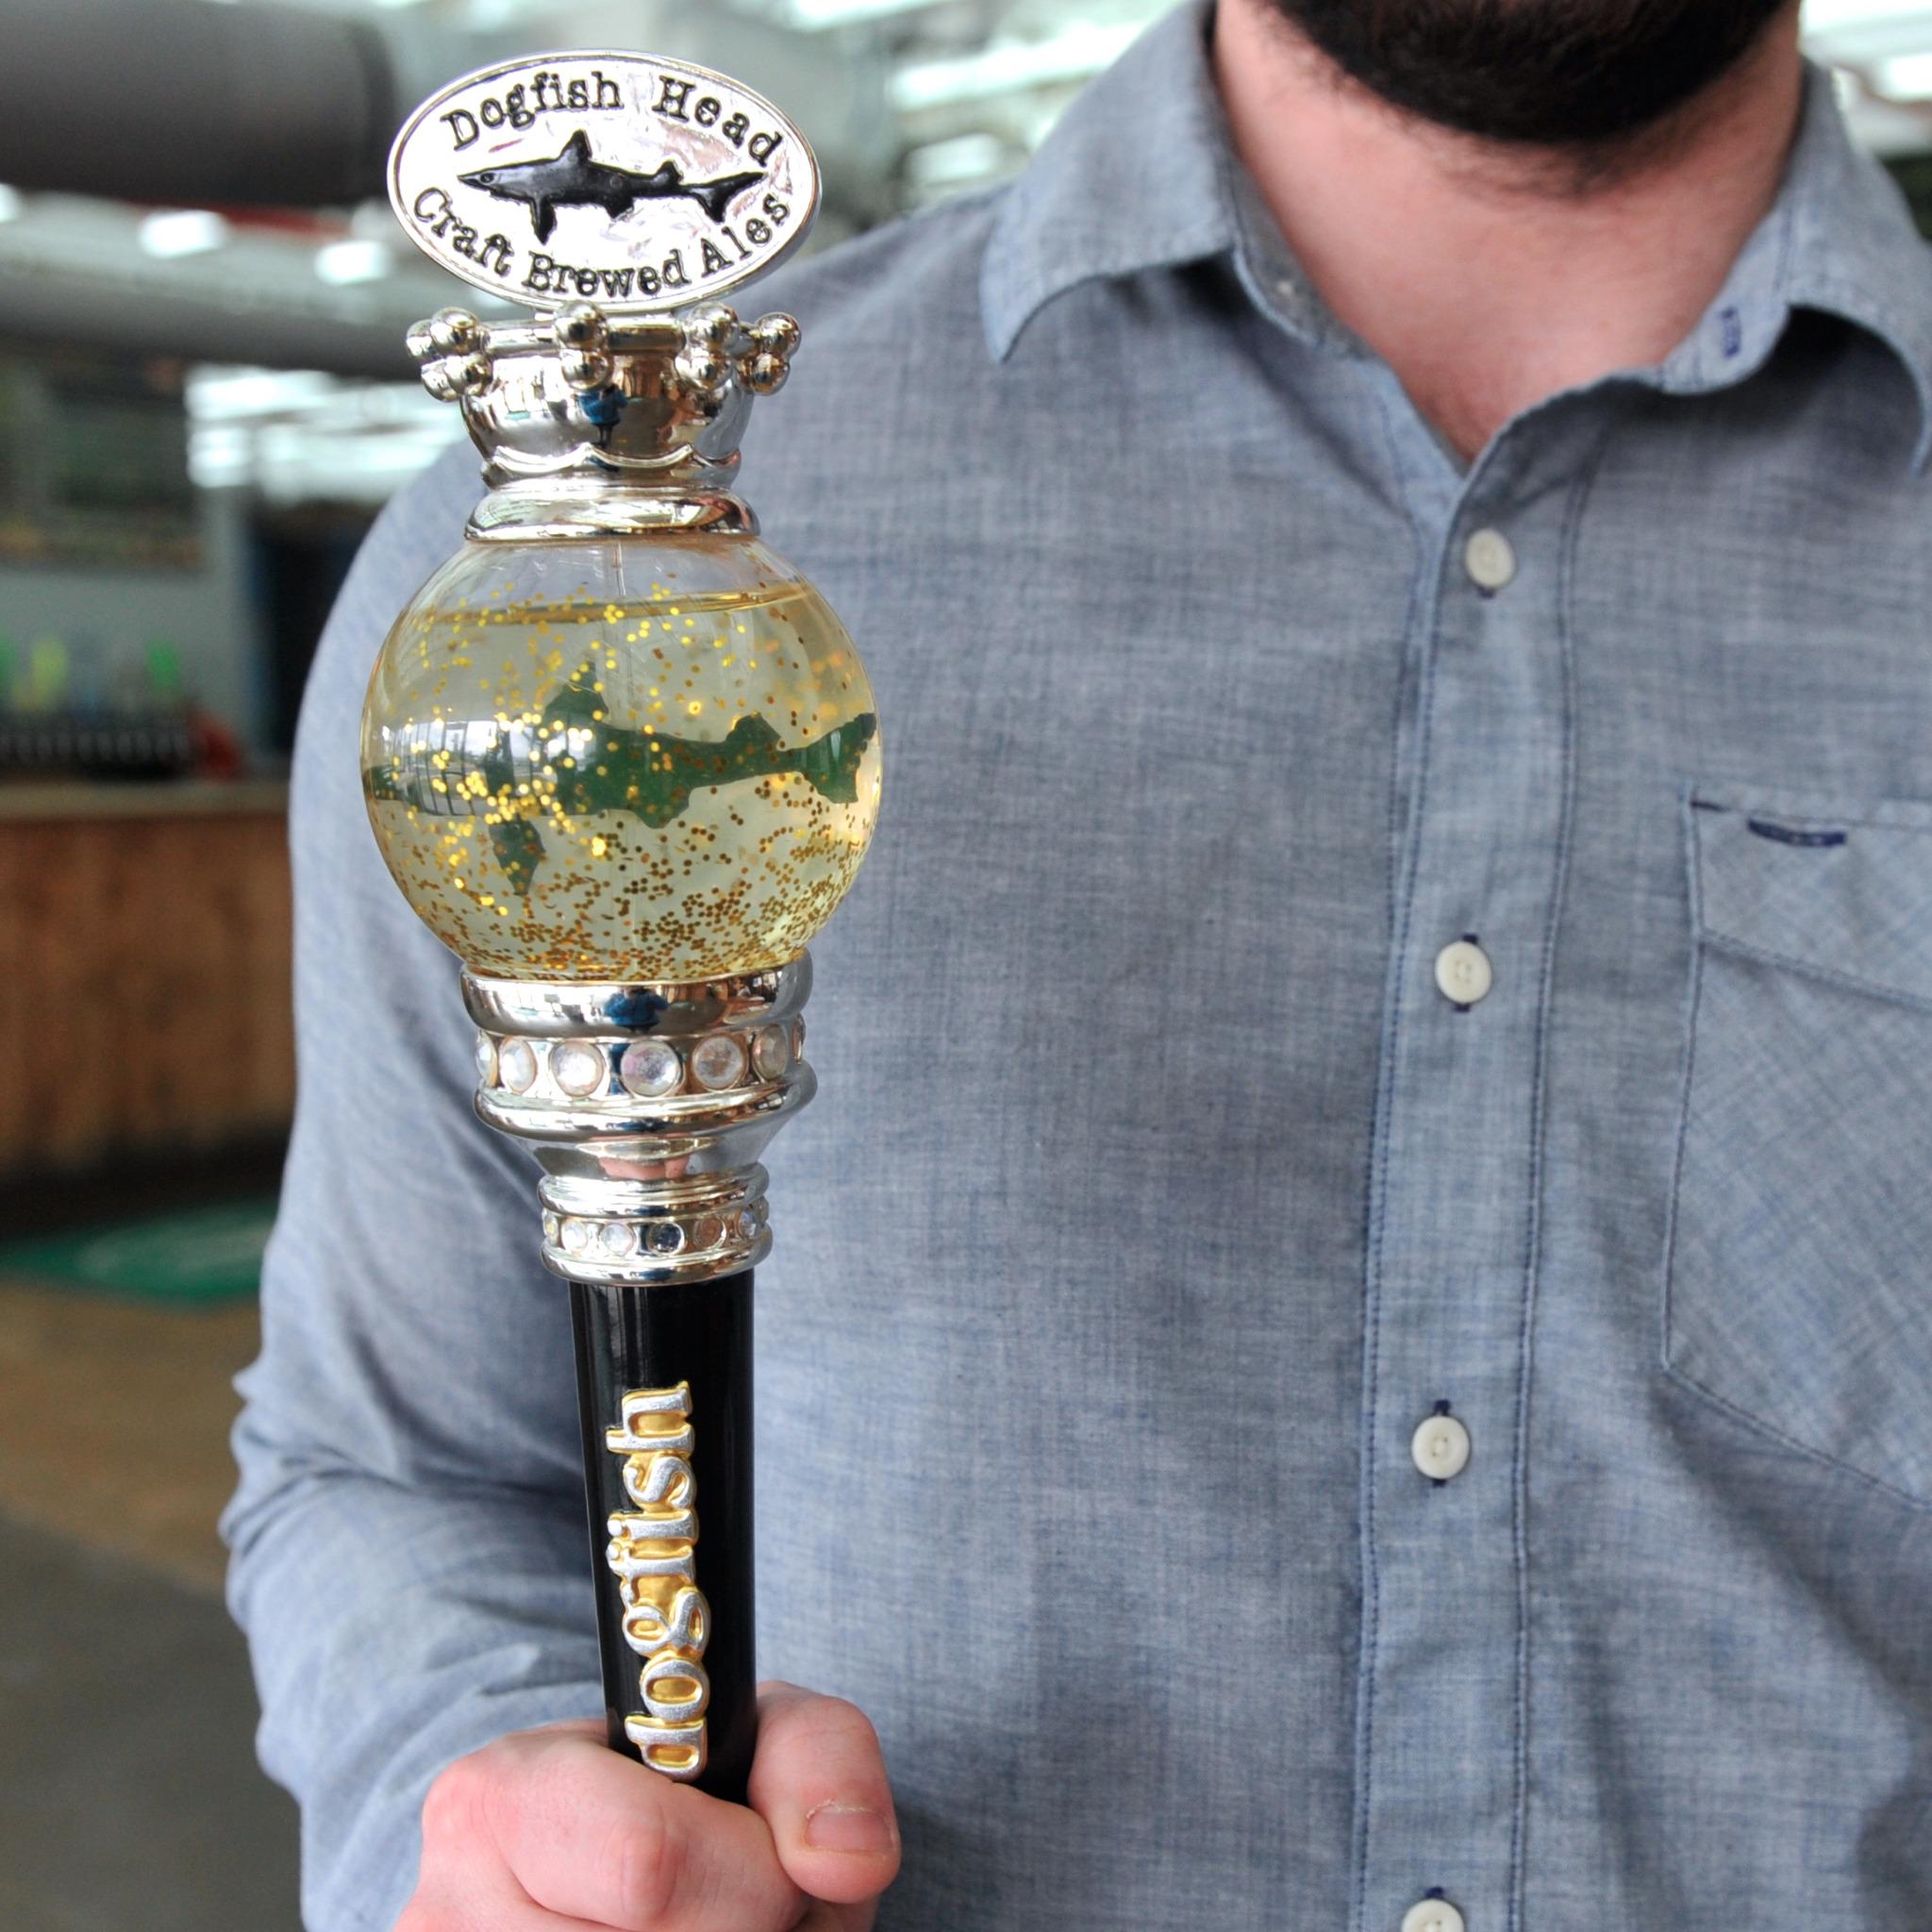 Dogfish Head Brewery on X: #TBT to our Pimp Cane tap handle